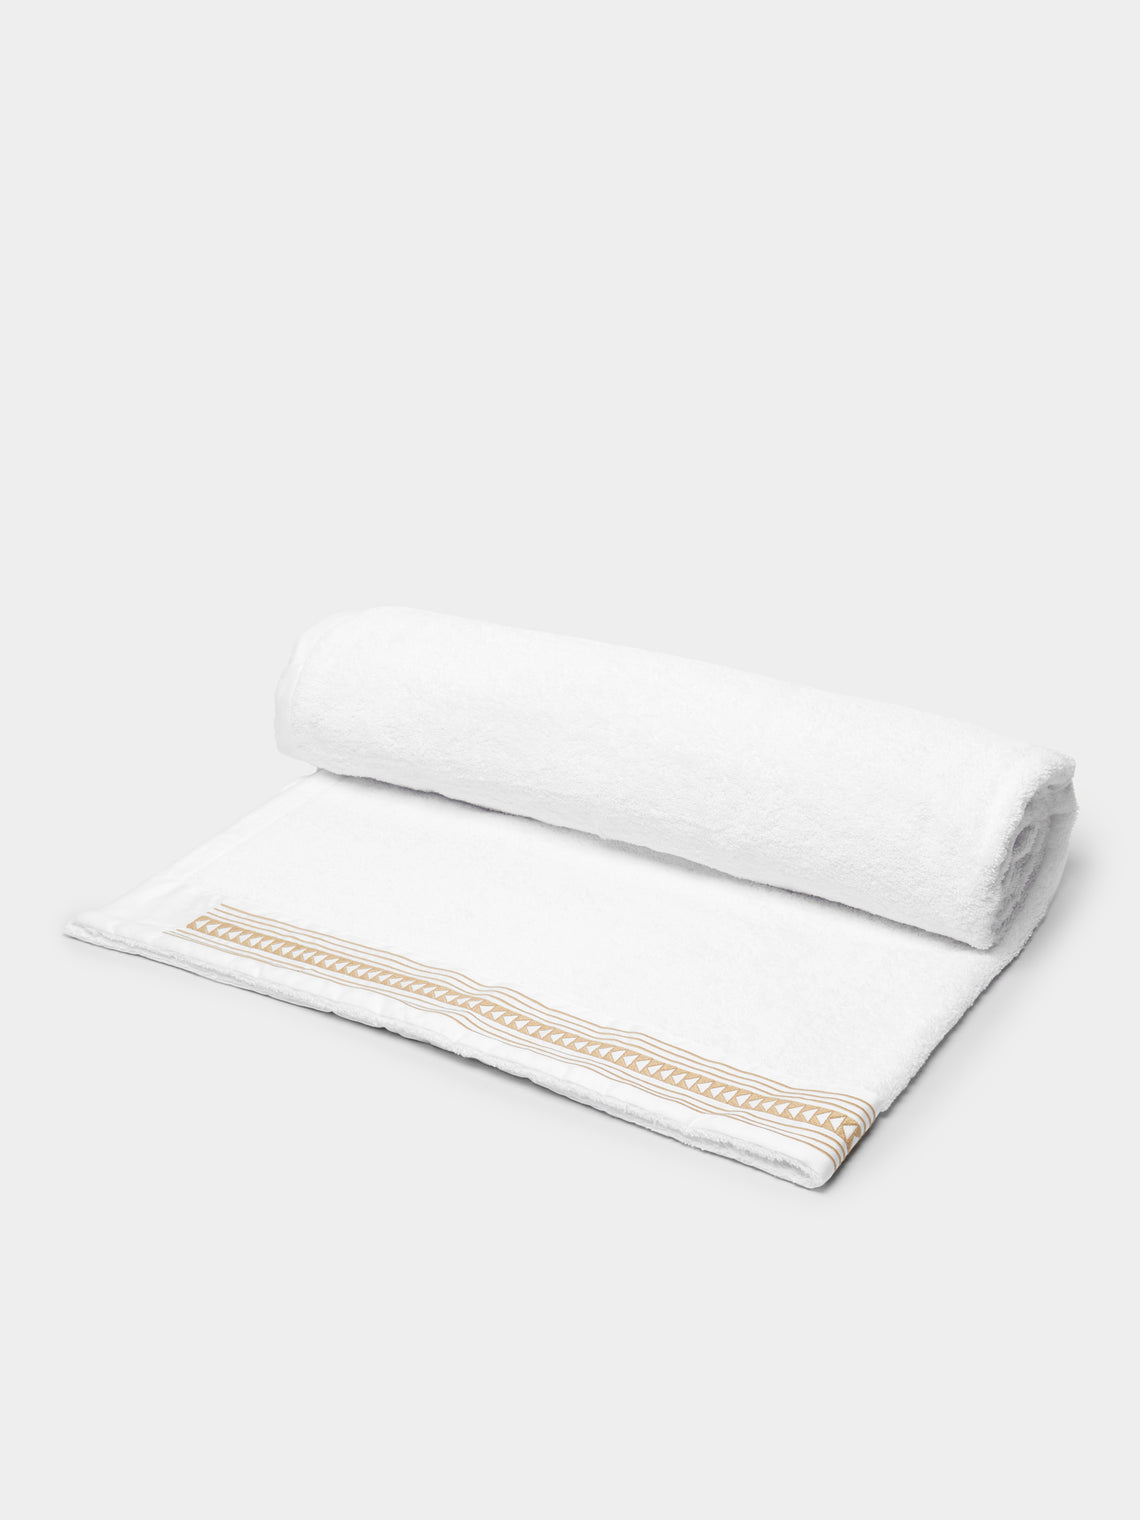 Loretta Caponi - Arrows Hand-Embroidered Cotton Towel Collection -  - ABASK